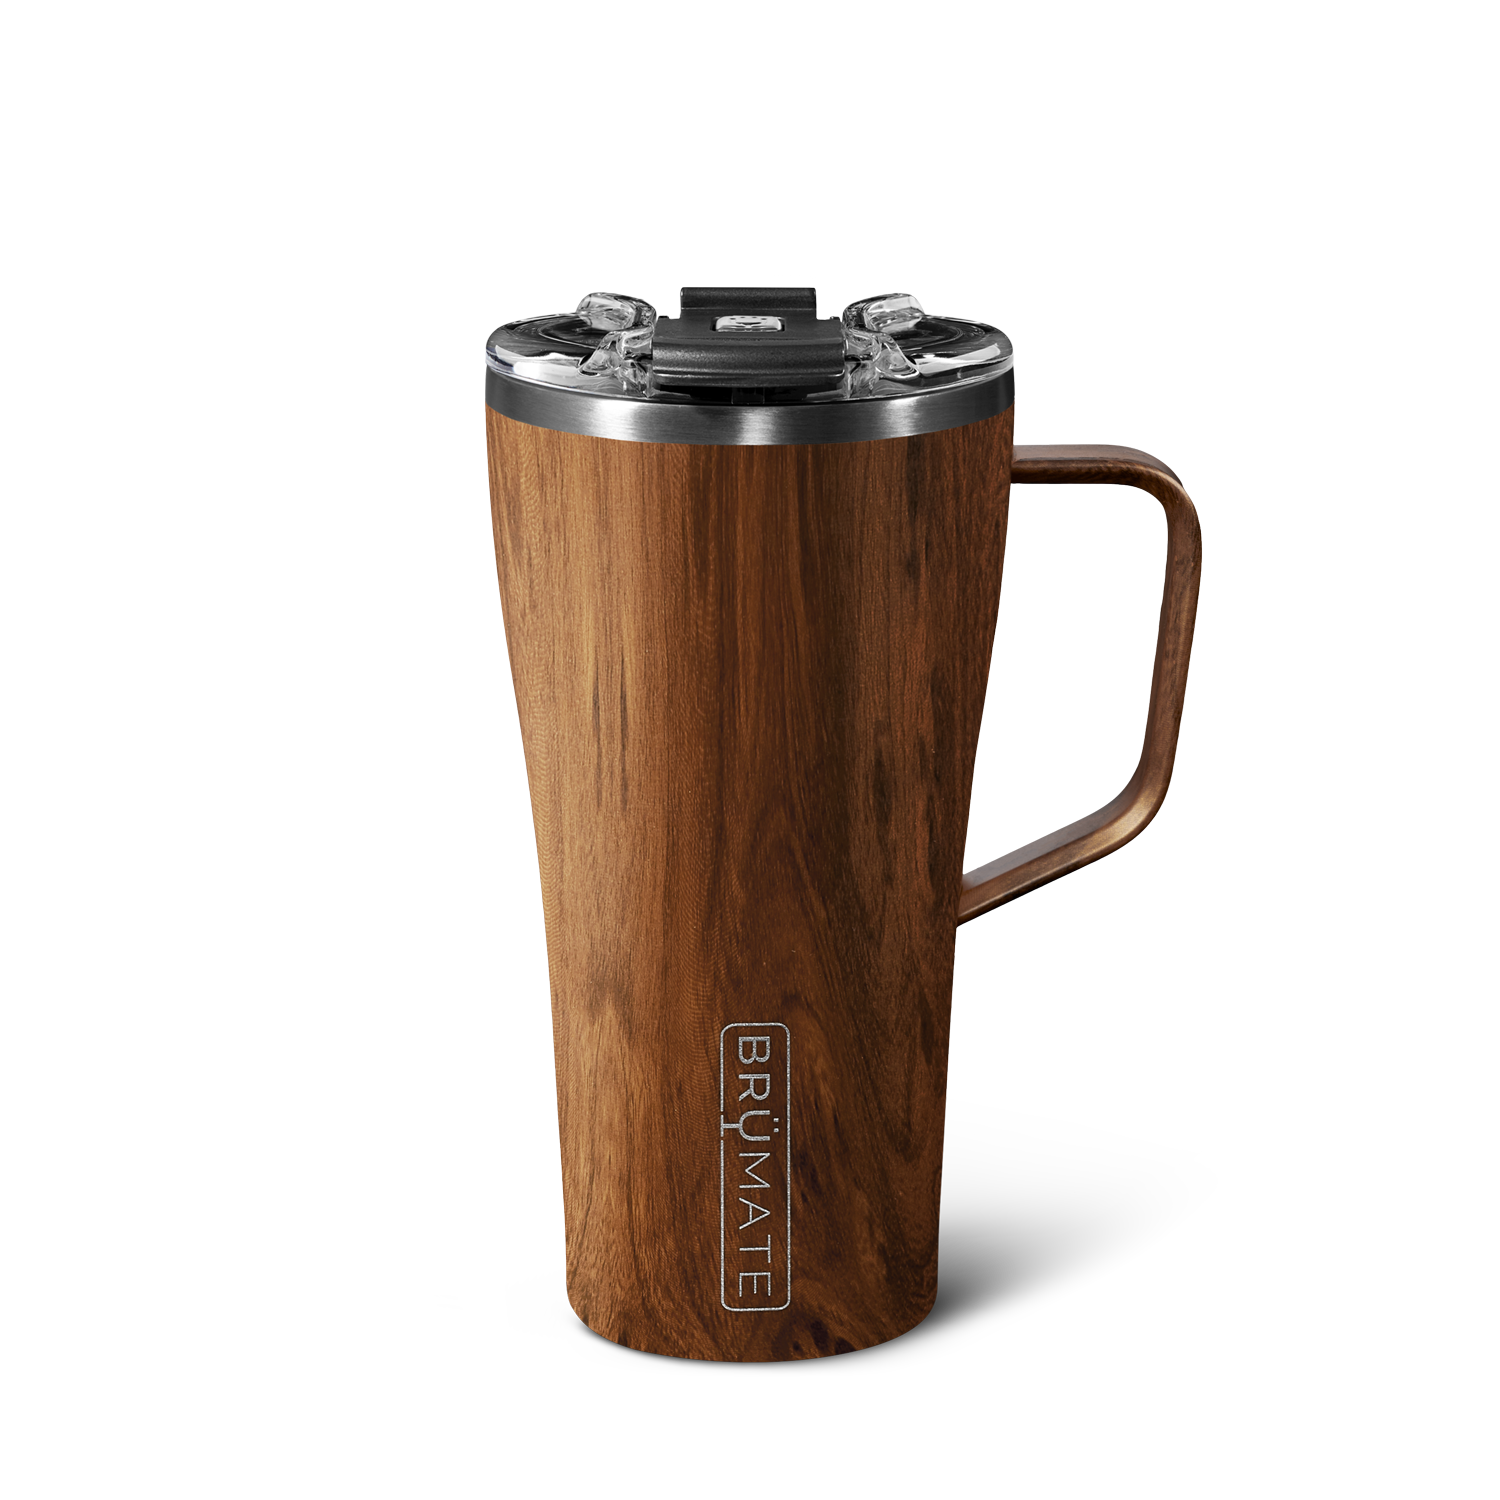 https://cdn.shopify.com/s/files/1/1114/2308/products/toddy-22-walnut.png?v=1660190631